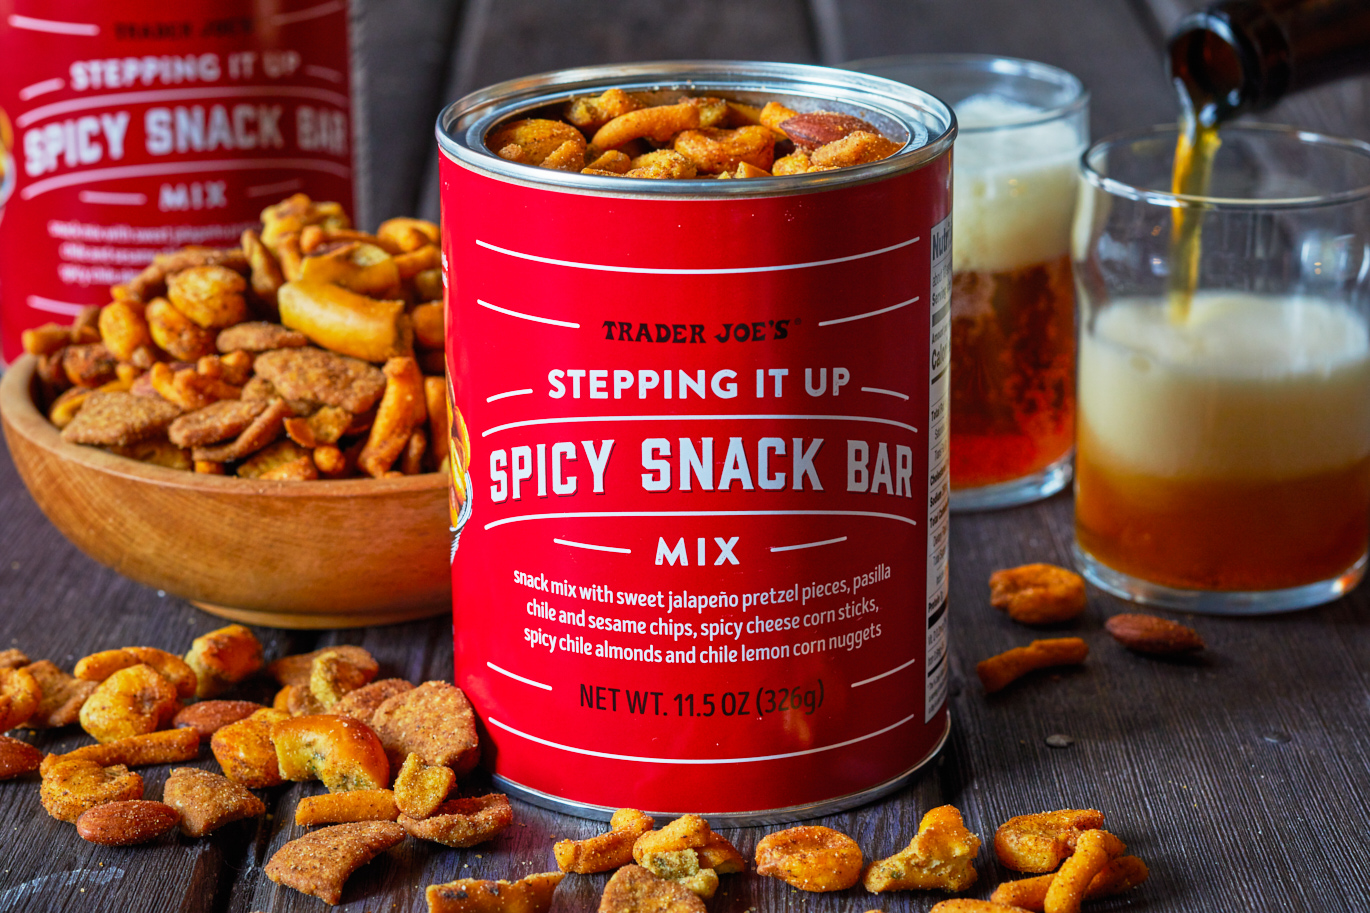 https://www.traderjoes.com/content/dam/trjo/context-images/68815-stepping-it-up-snack-mix-pdp.jpg